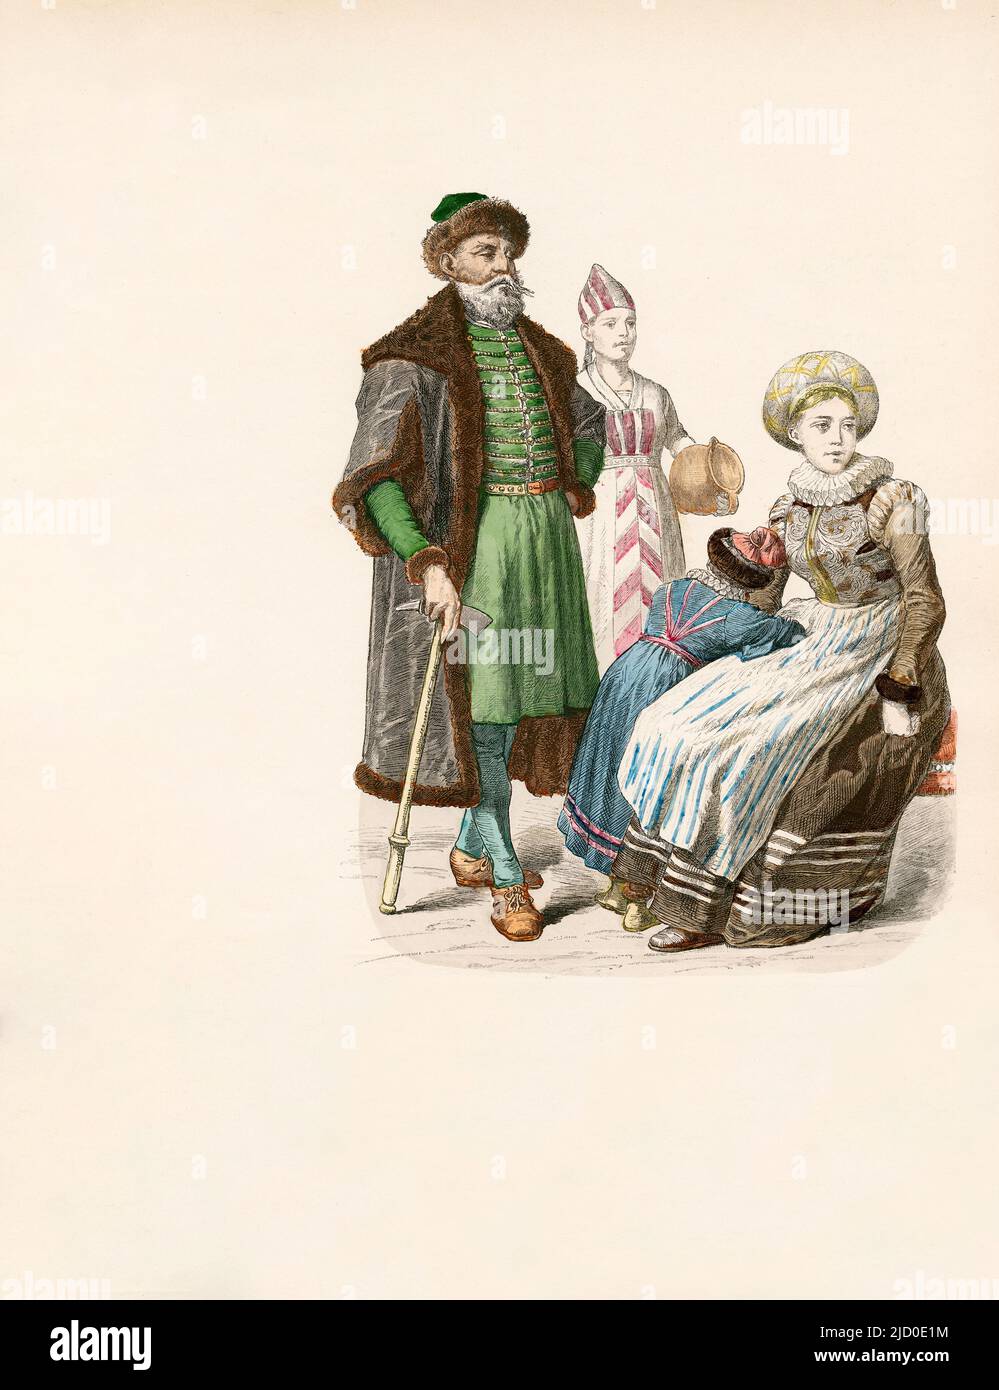 Gentleman and Wife, Countrywoman, Norway, First Third of the 17th Century, Illustration, The History of Costume, Braun & Schneider, Munich, Germany, 1861-1880 Stock Photo